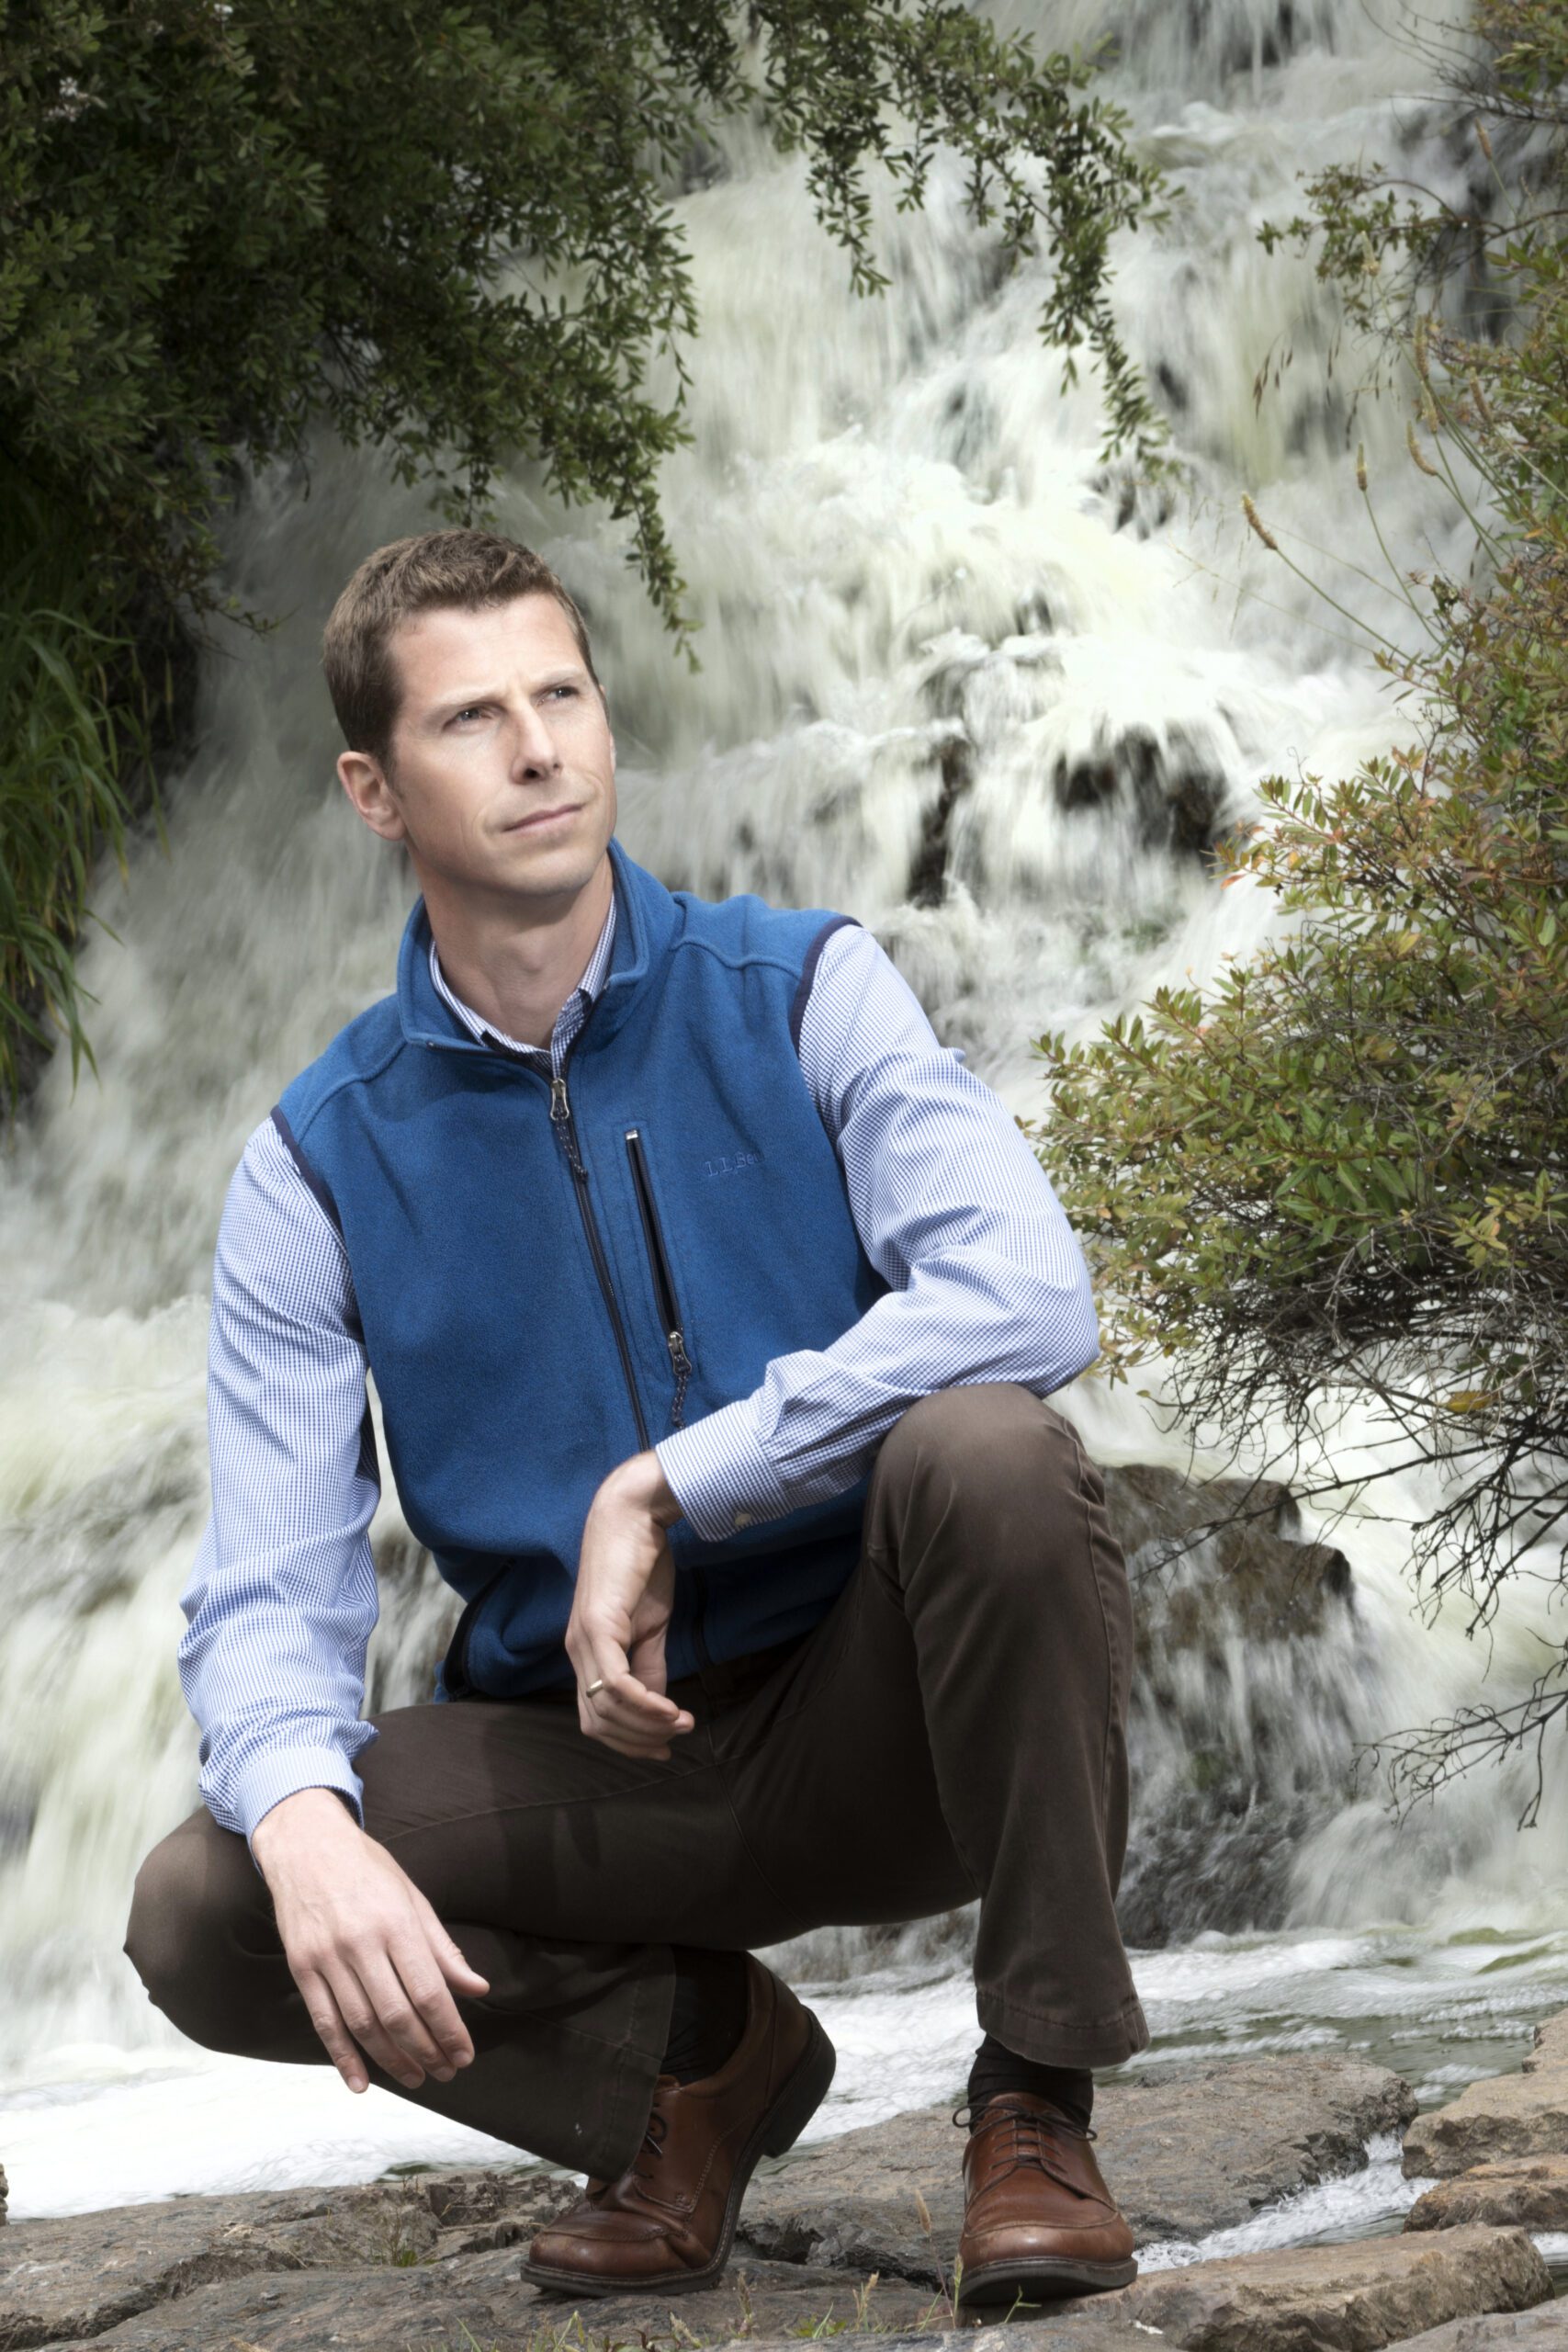 Man wearing a blue vest, light blue dress shirt, brown slacks and brown shoes, crouching in front of a waterfall